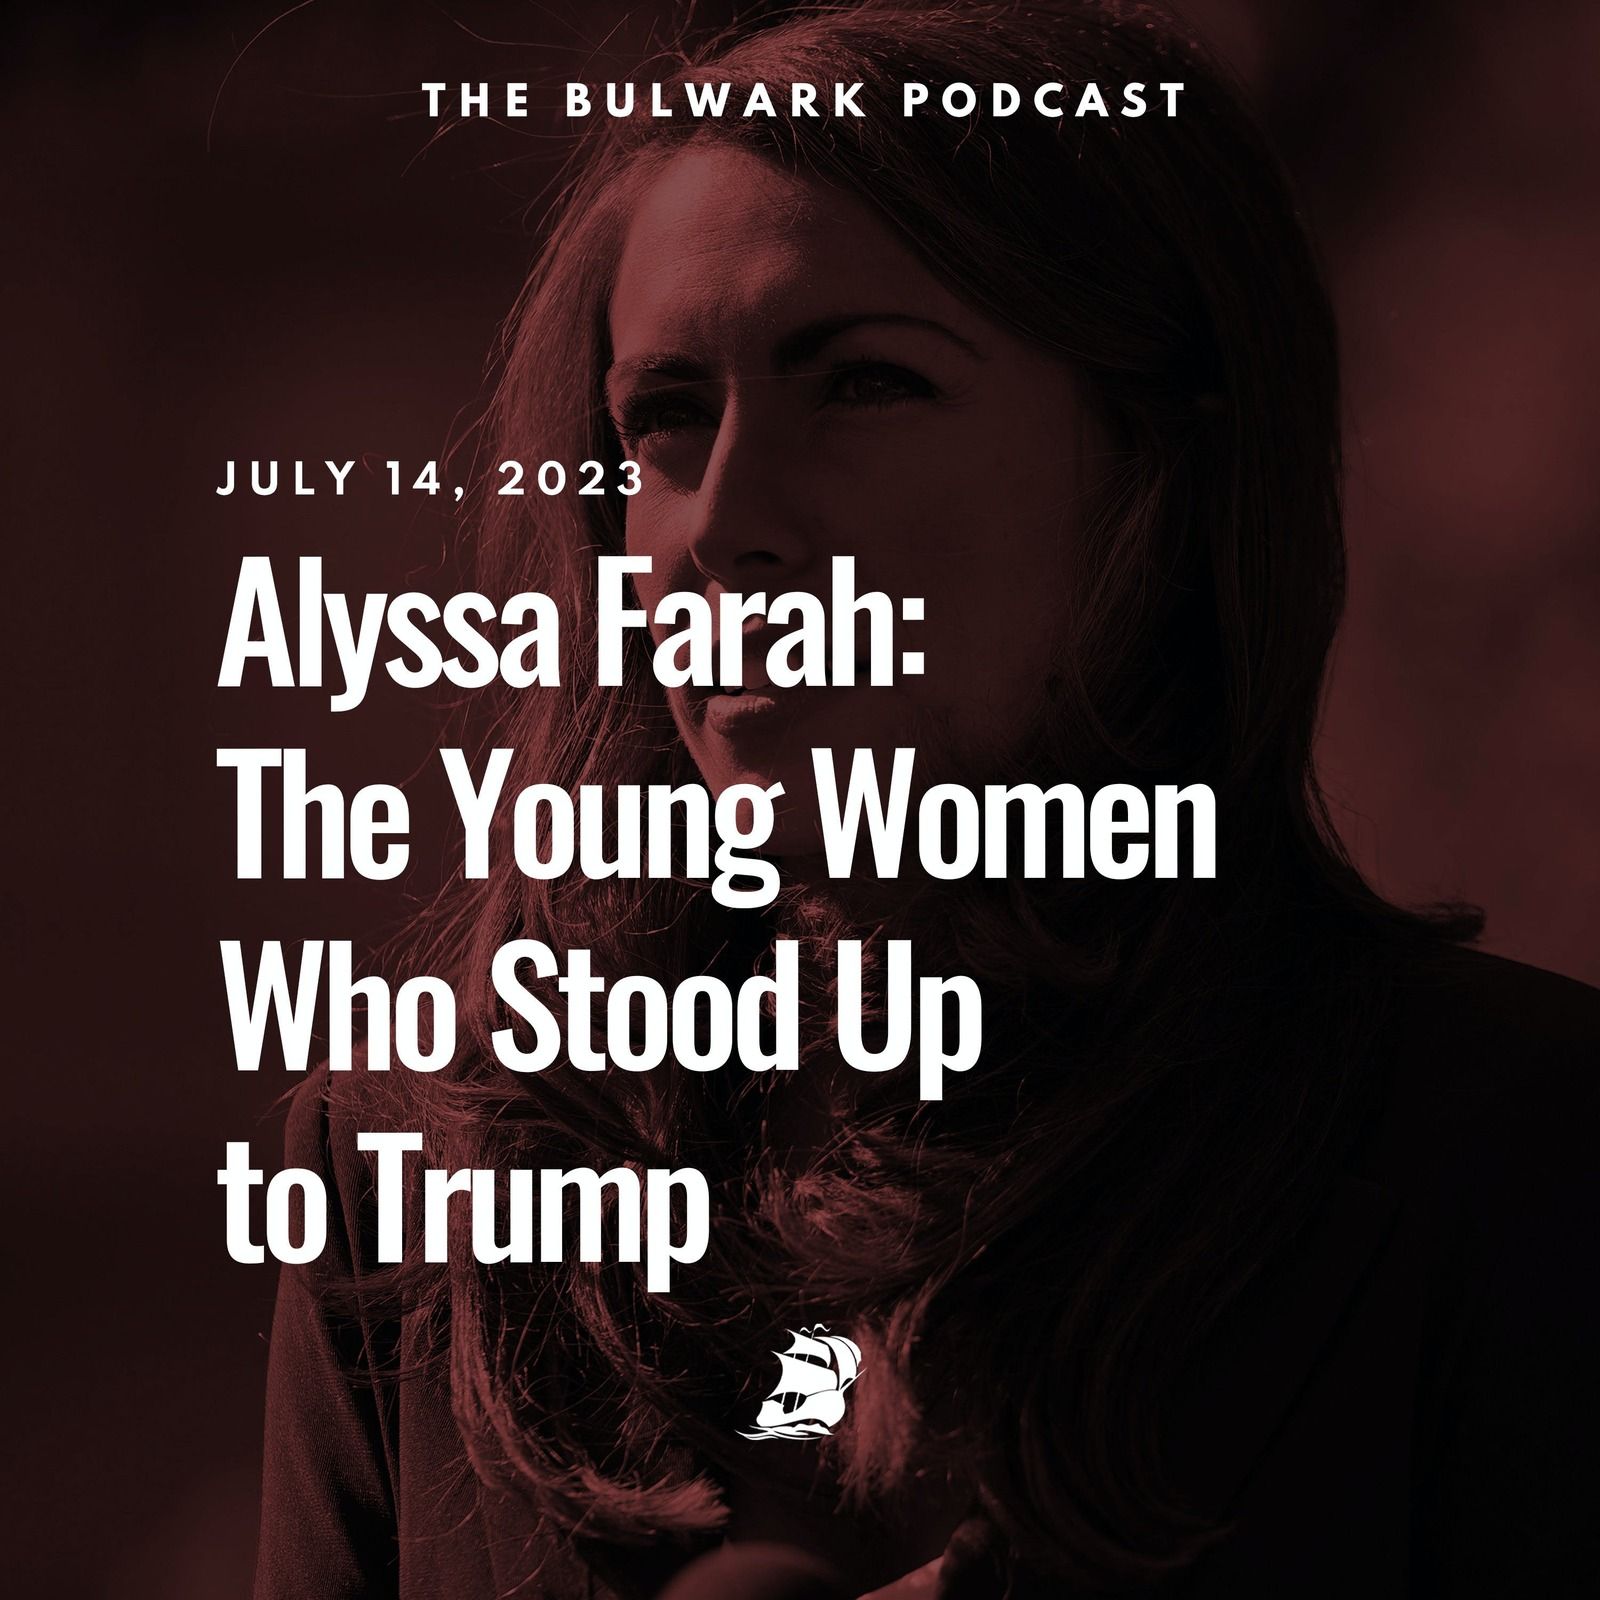 Why Are People Still Sticking With Trump After All This? by The Bulwark Podcast